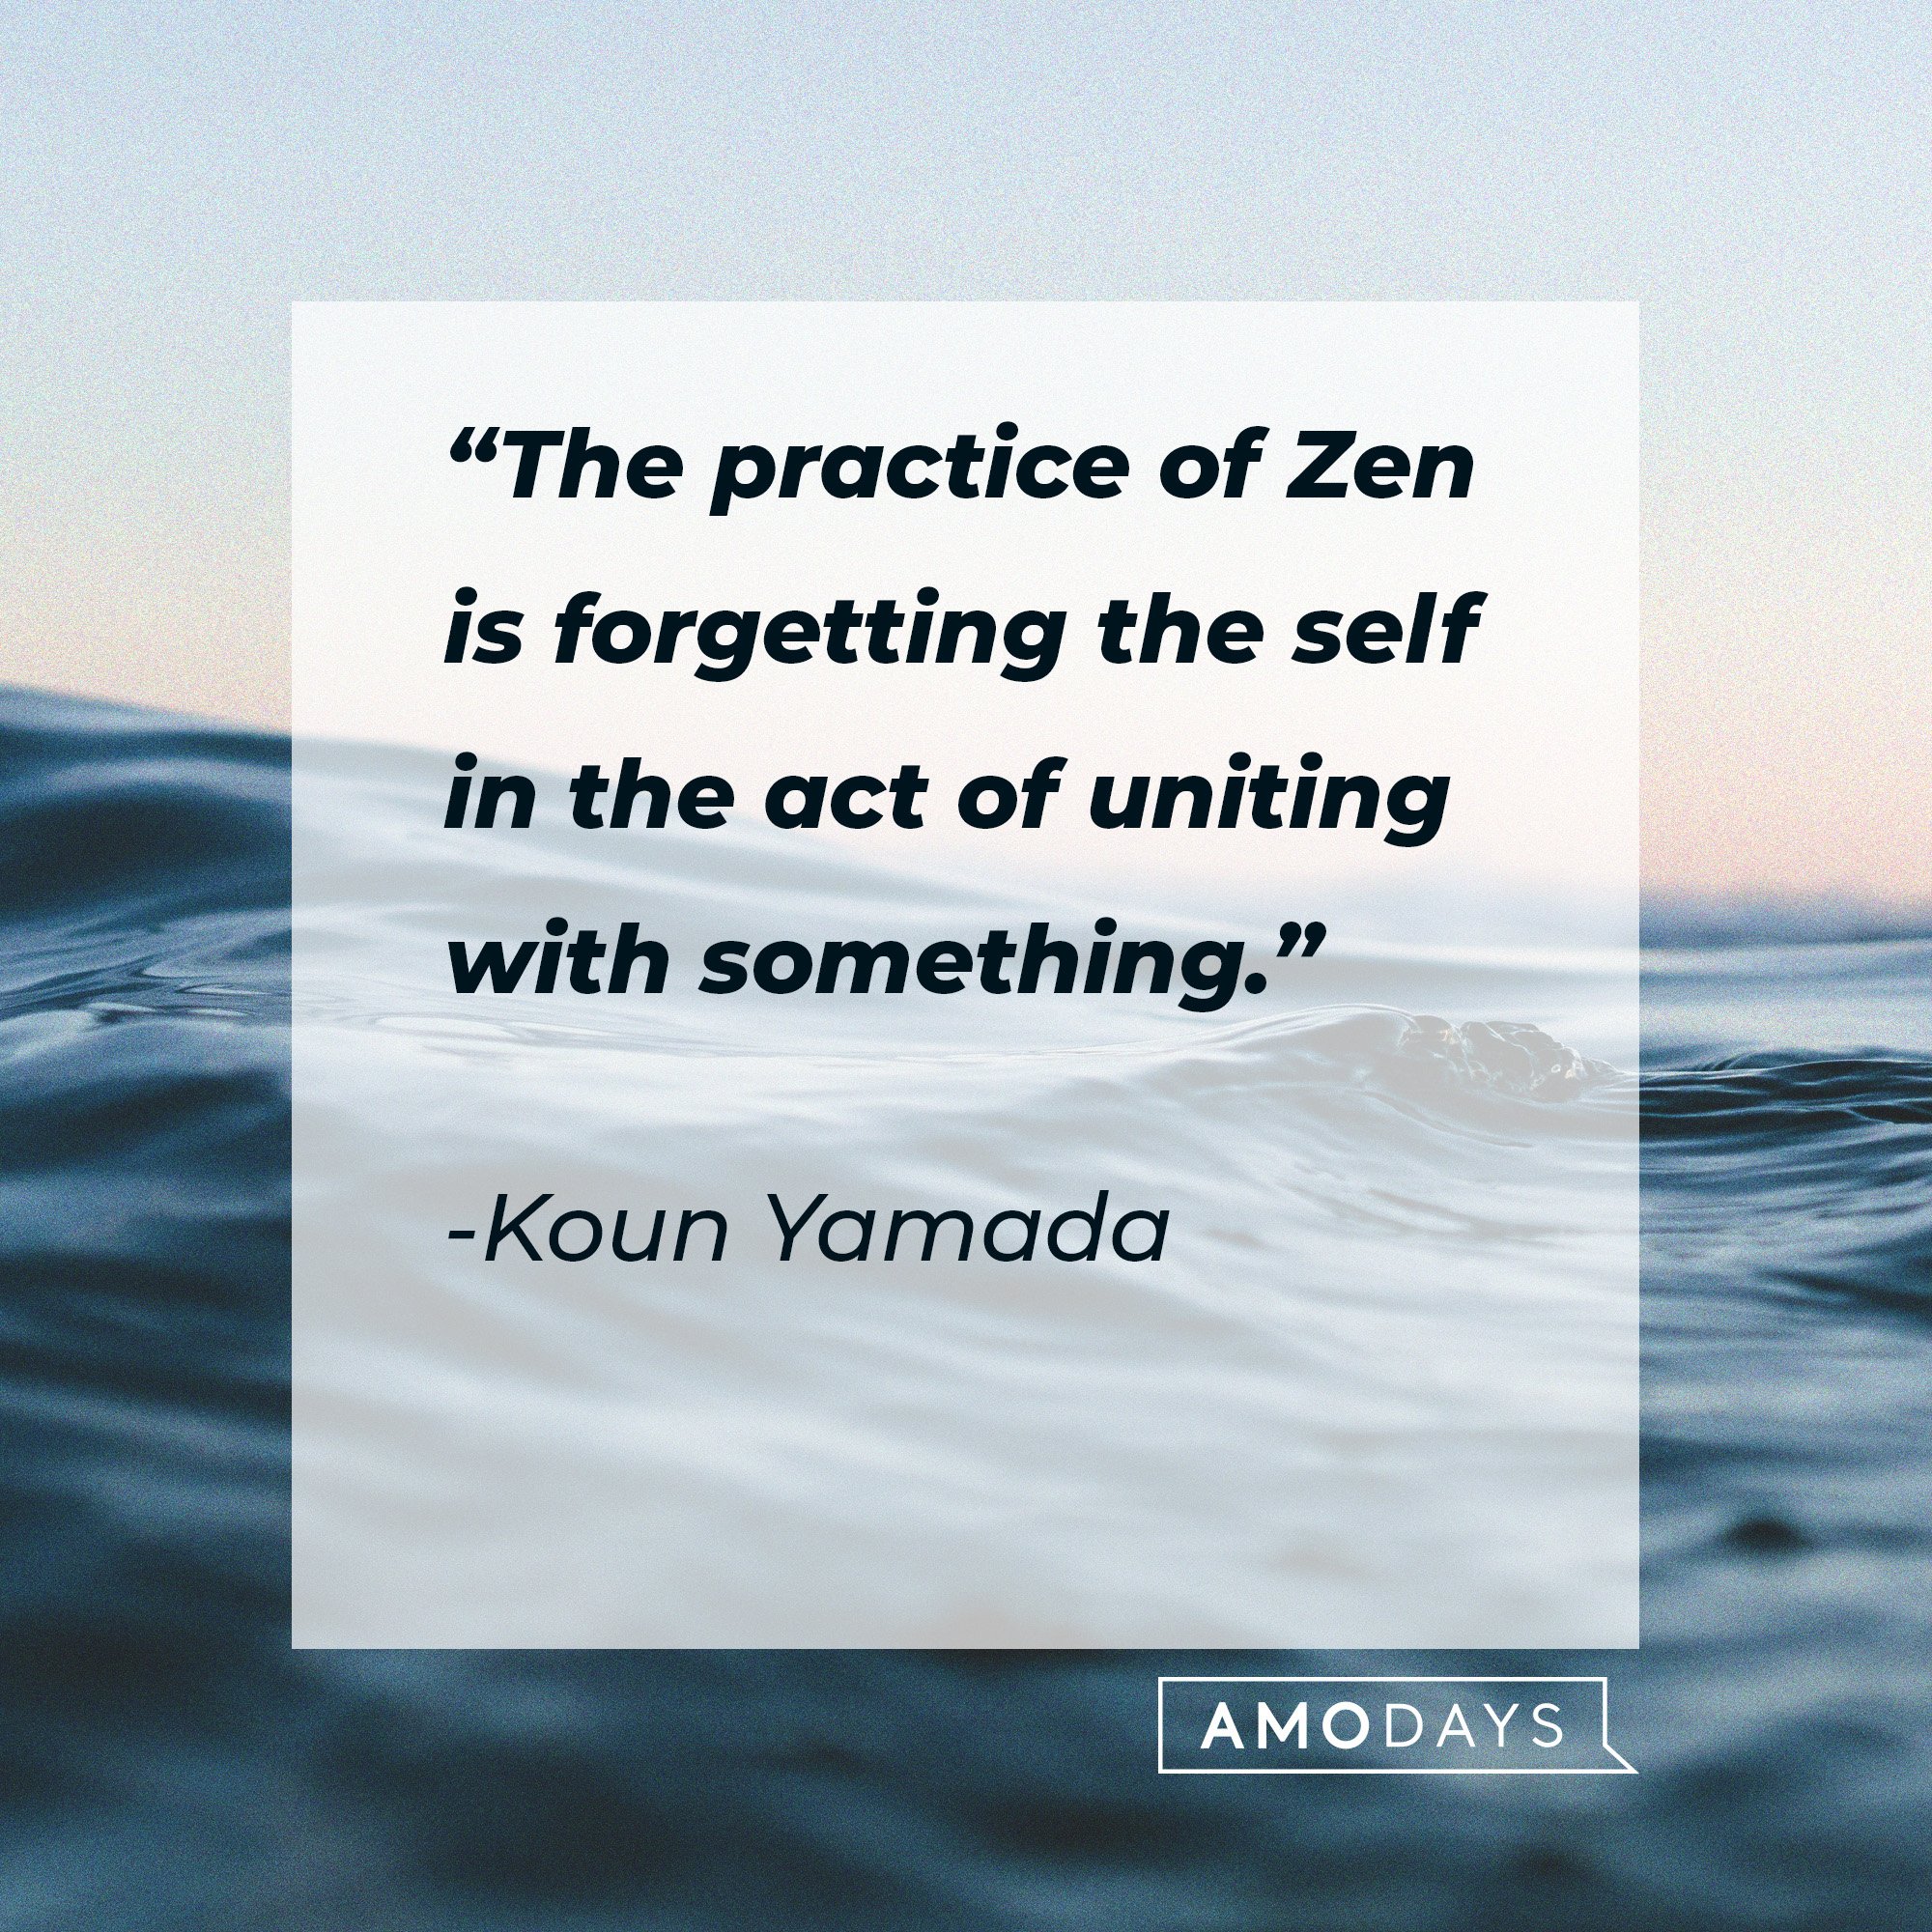  Koun Yamada's quote: “The practice of Zen is forgetting the self in the act of uniting with something.” | Image: AmoDays